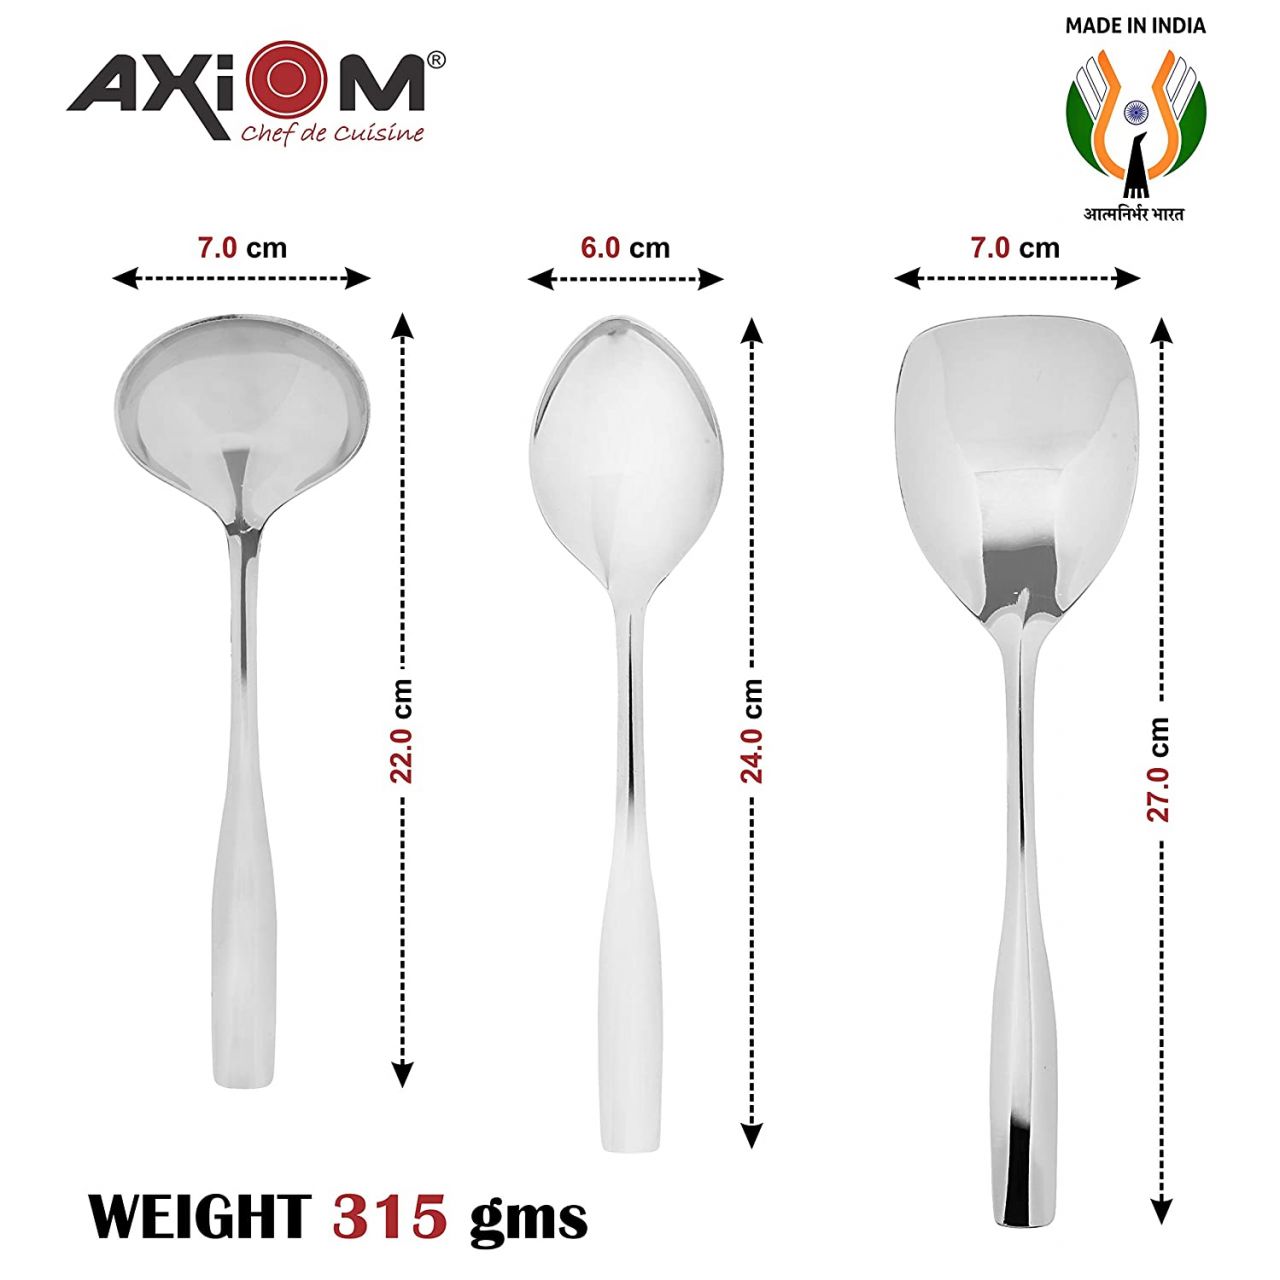 AXIOM Serving Tools Stainless Steel 4 Piece Heavy Gauge Non-Stick Set